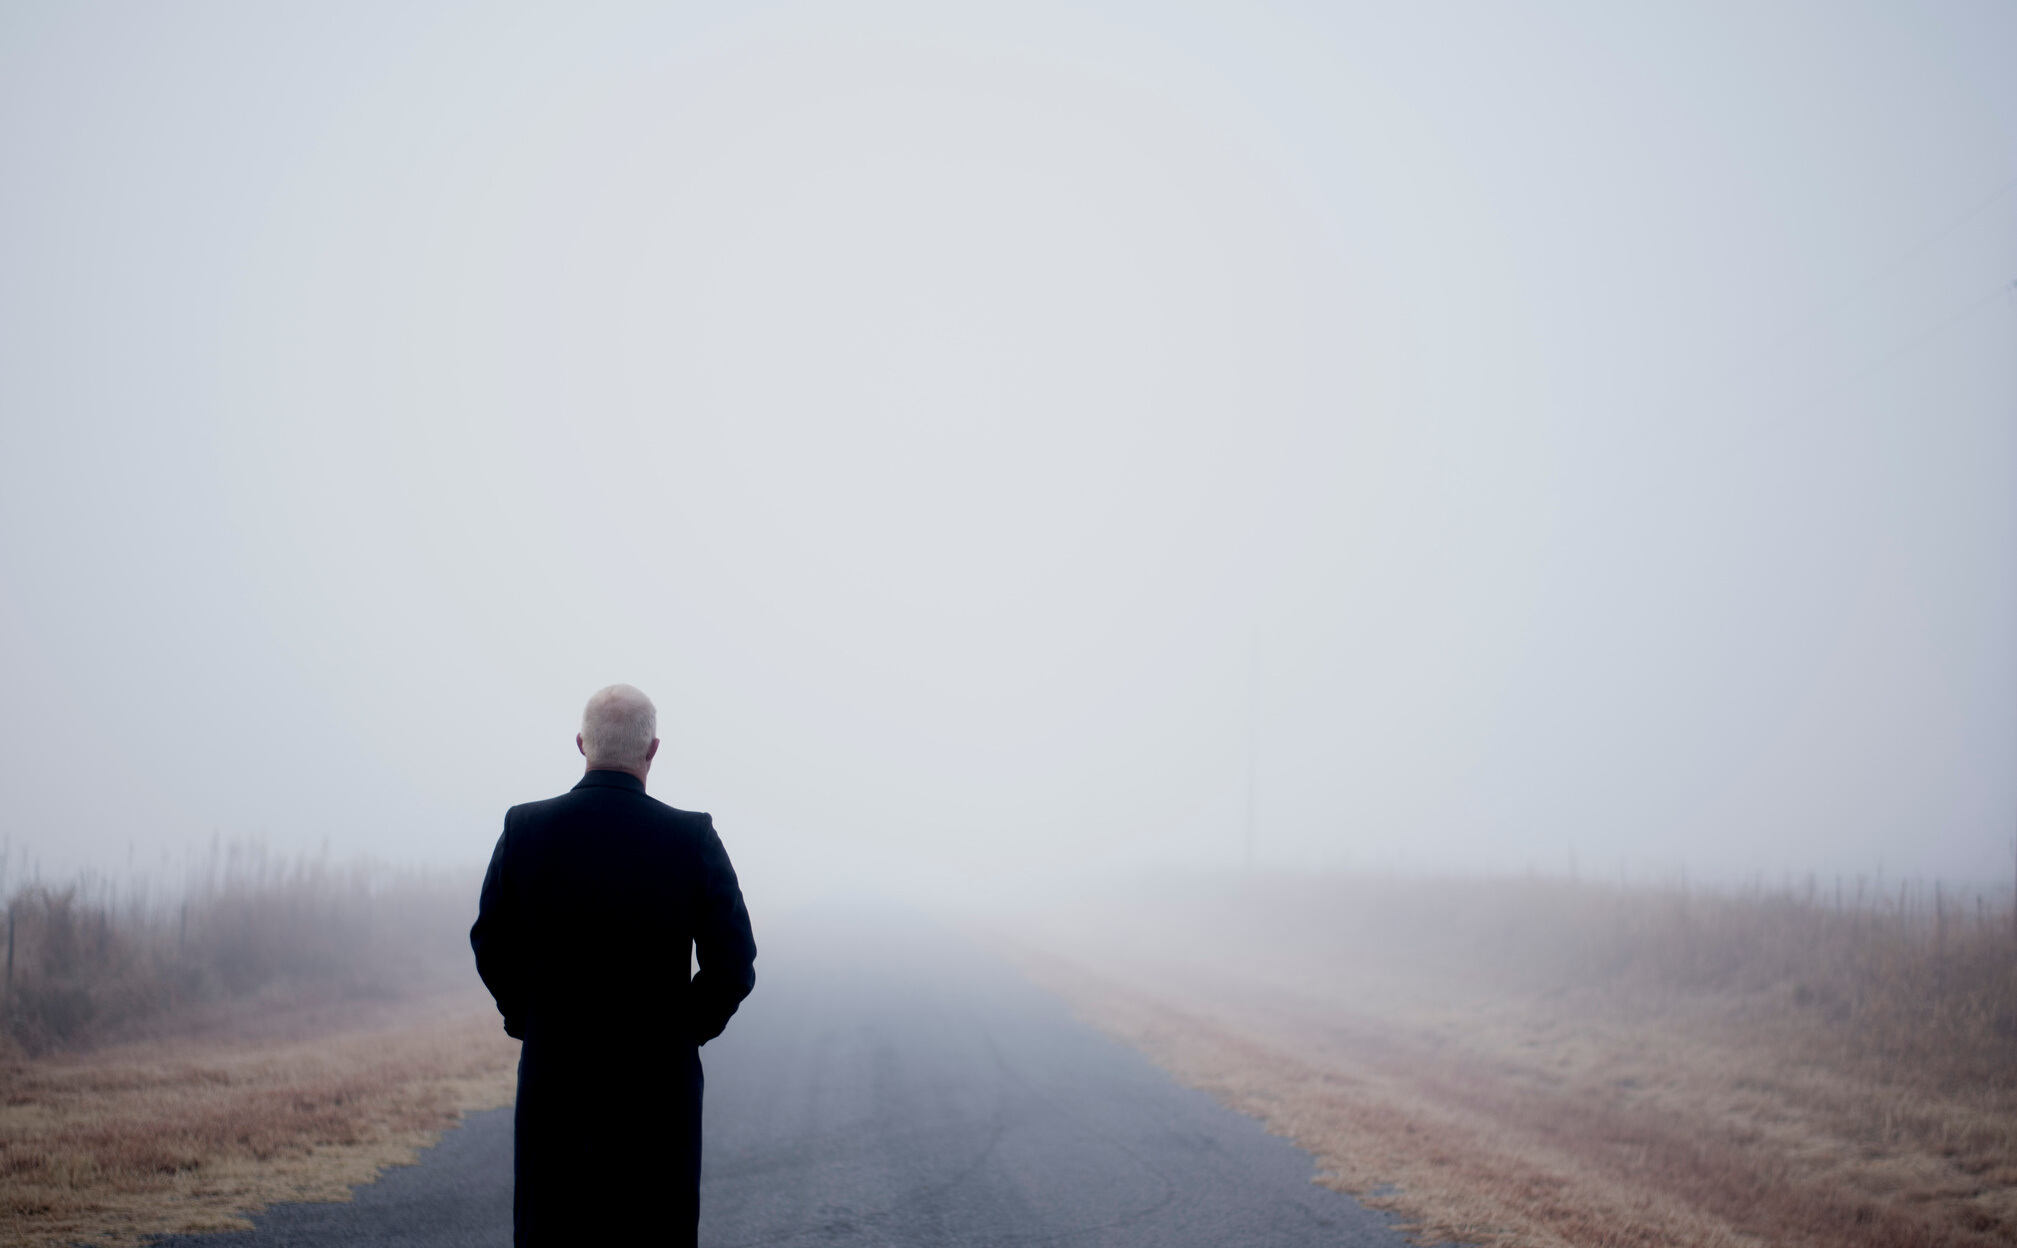 A Back View of a Man Standing on a Foggy Road